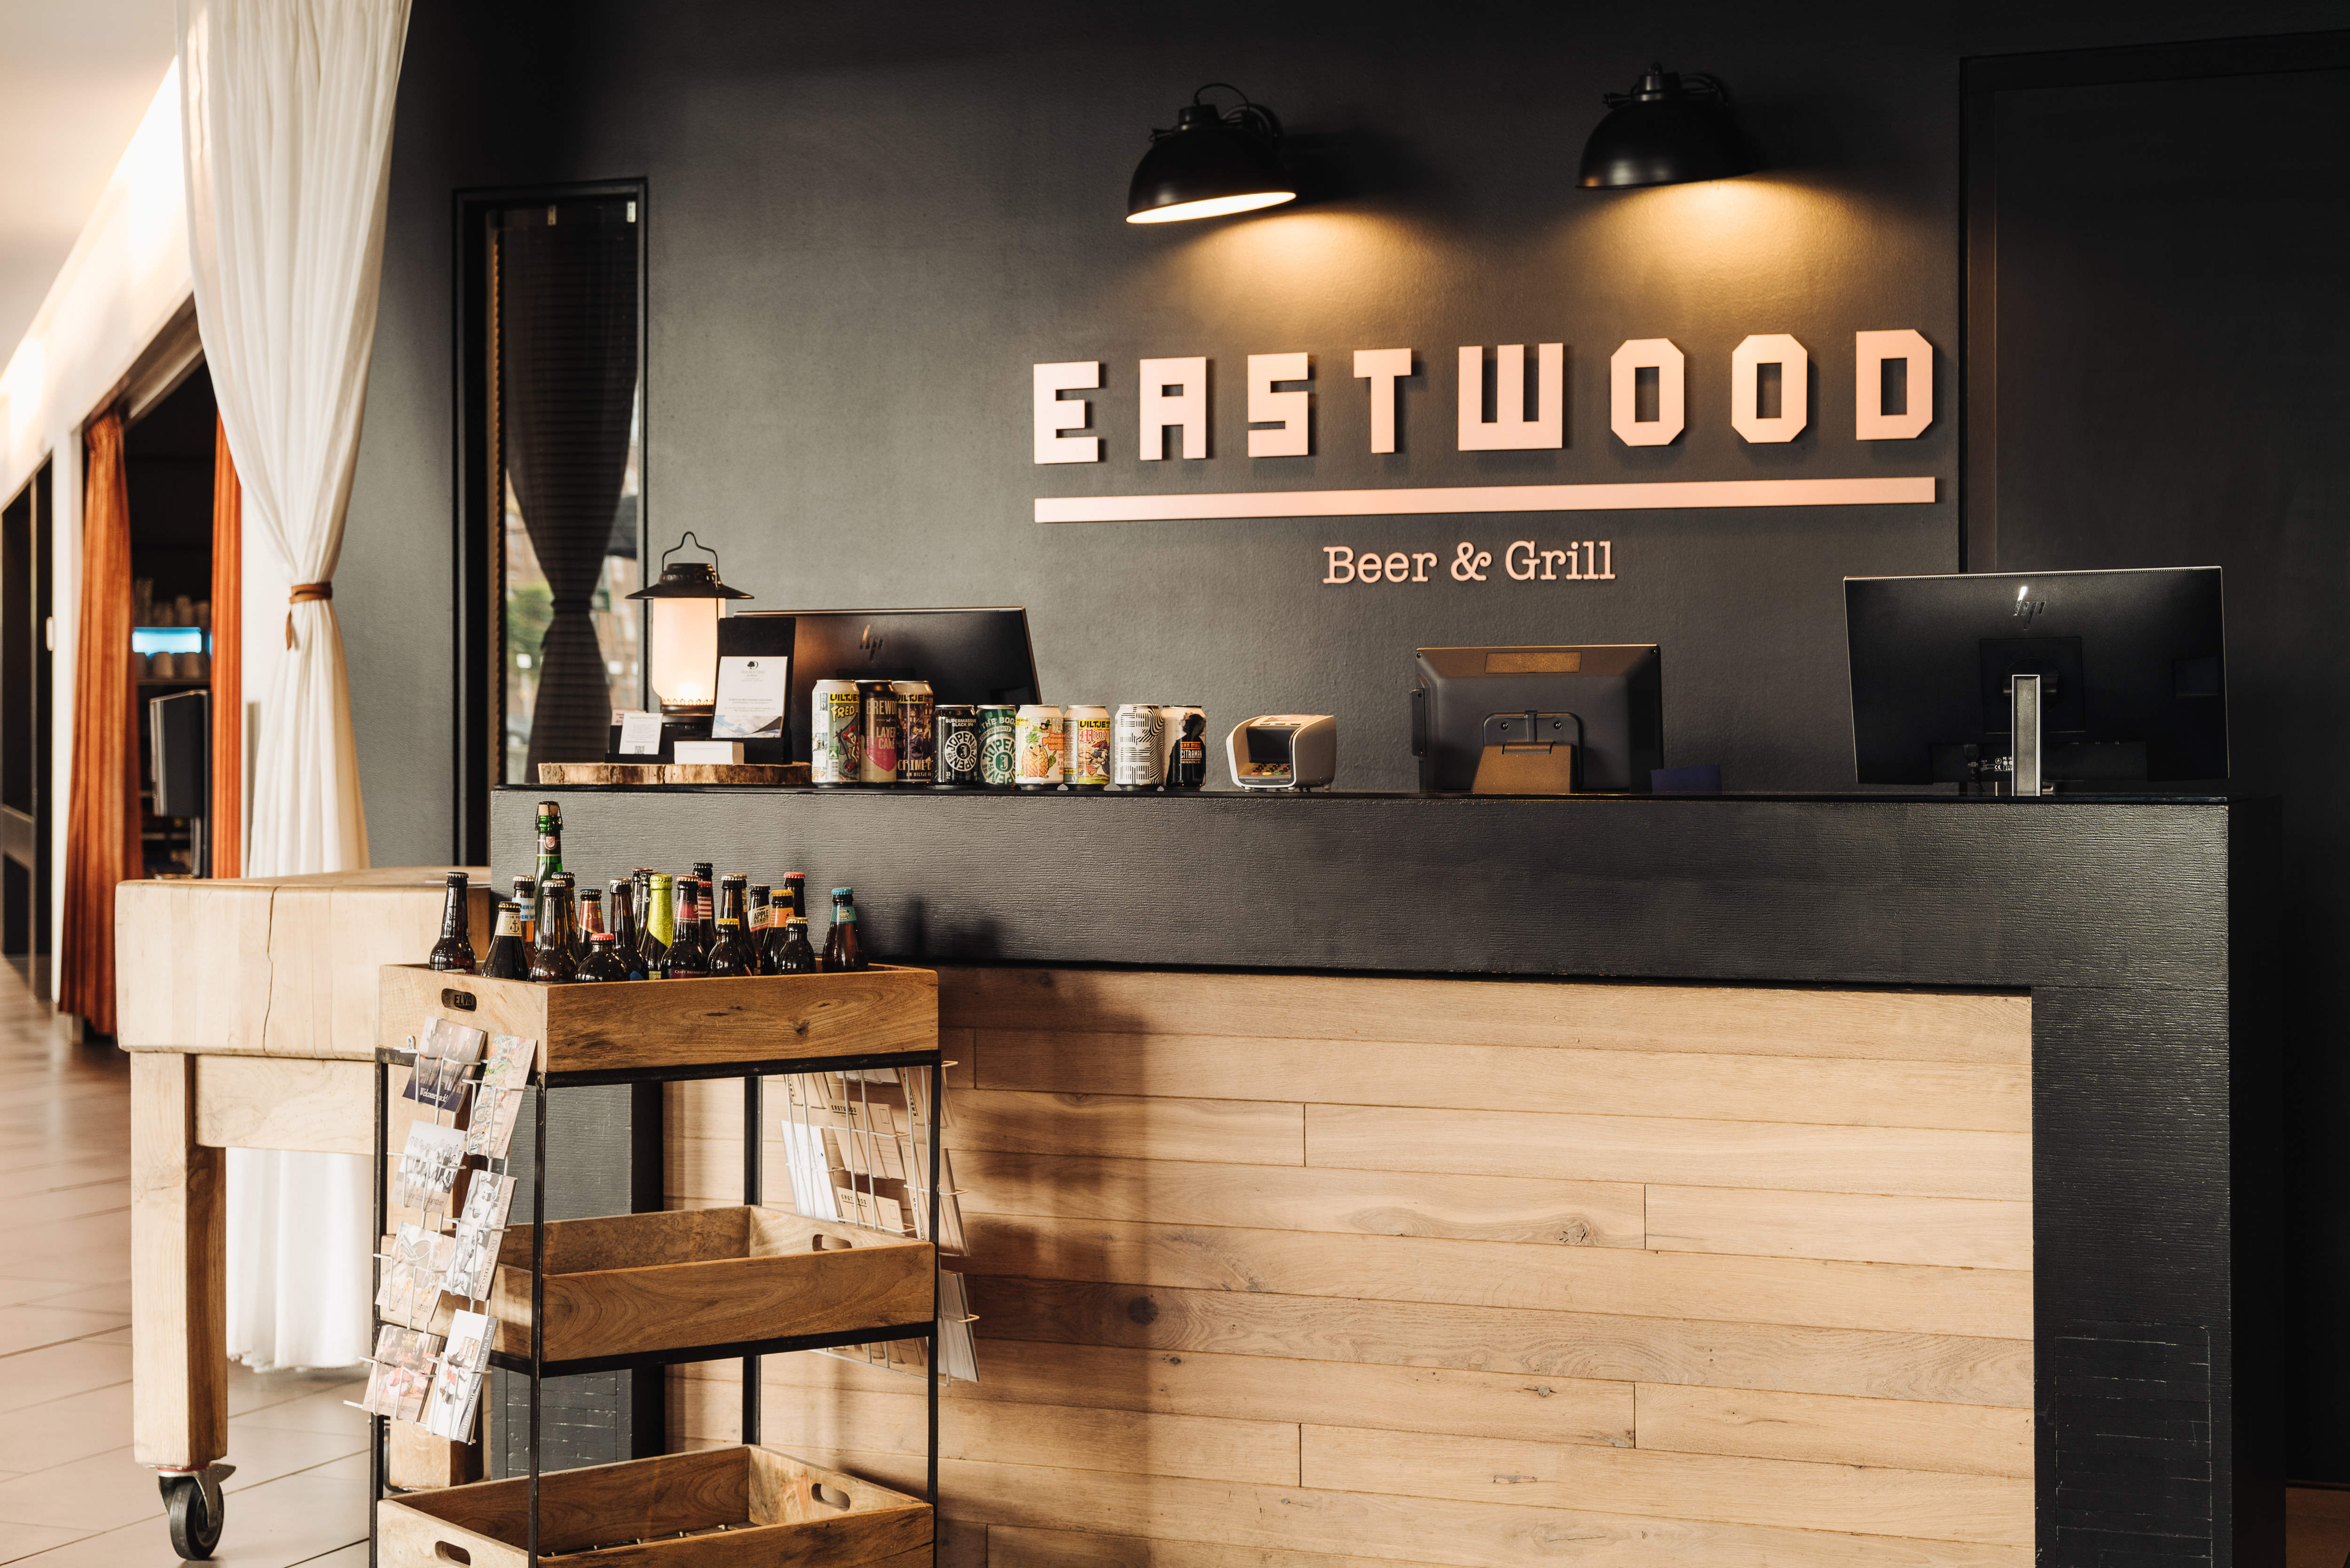 Eastwood Beer & Grill